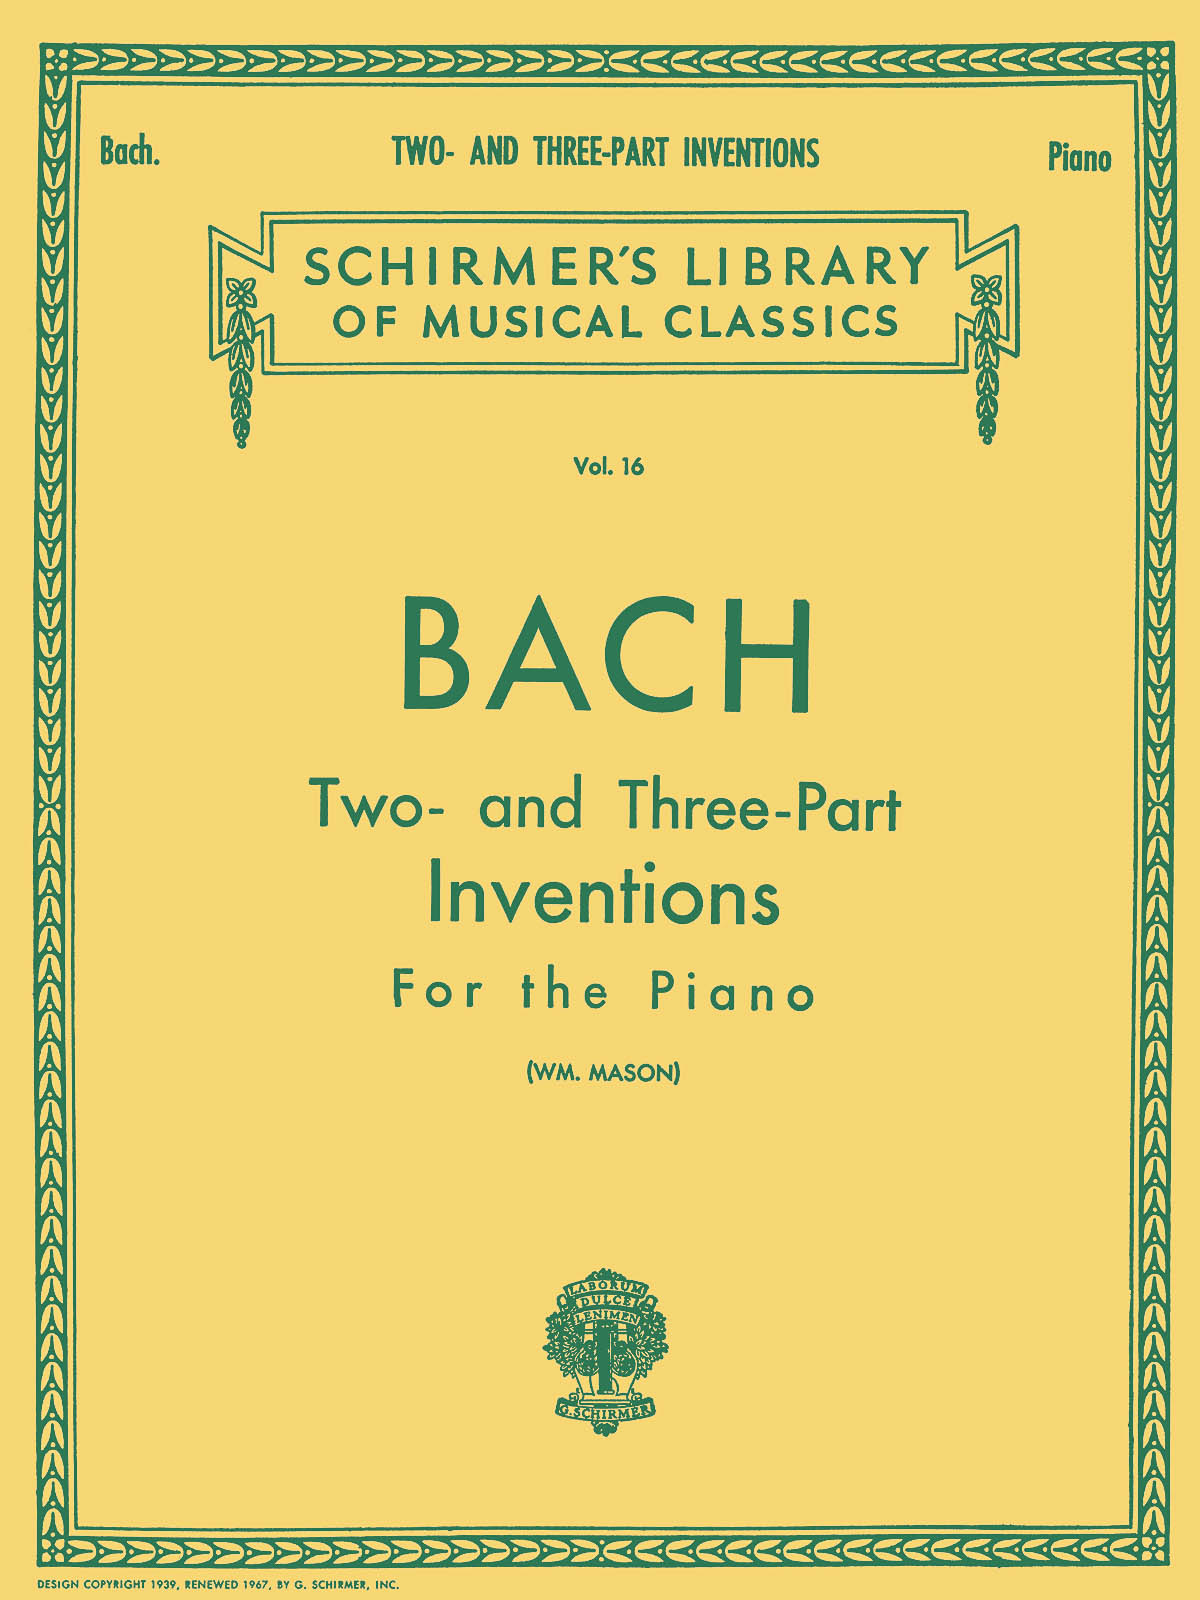 Bach: 30 Two- and Three-Part Inventions